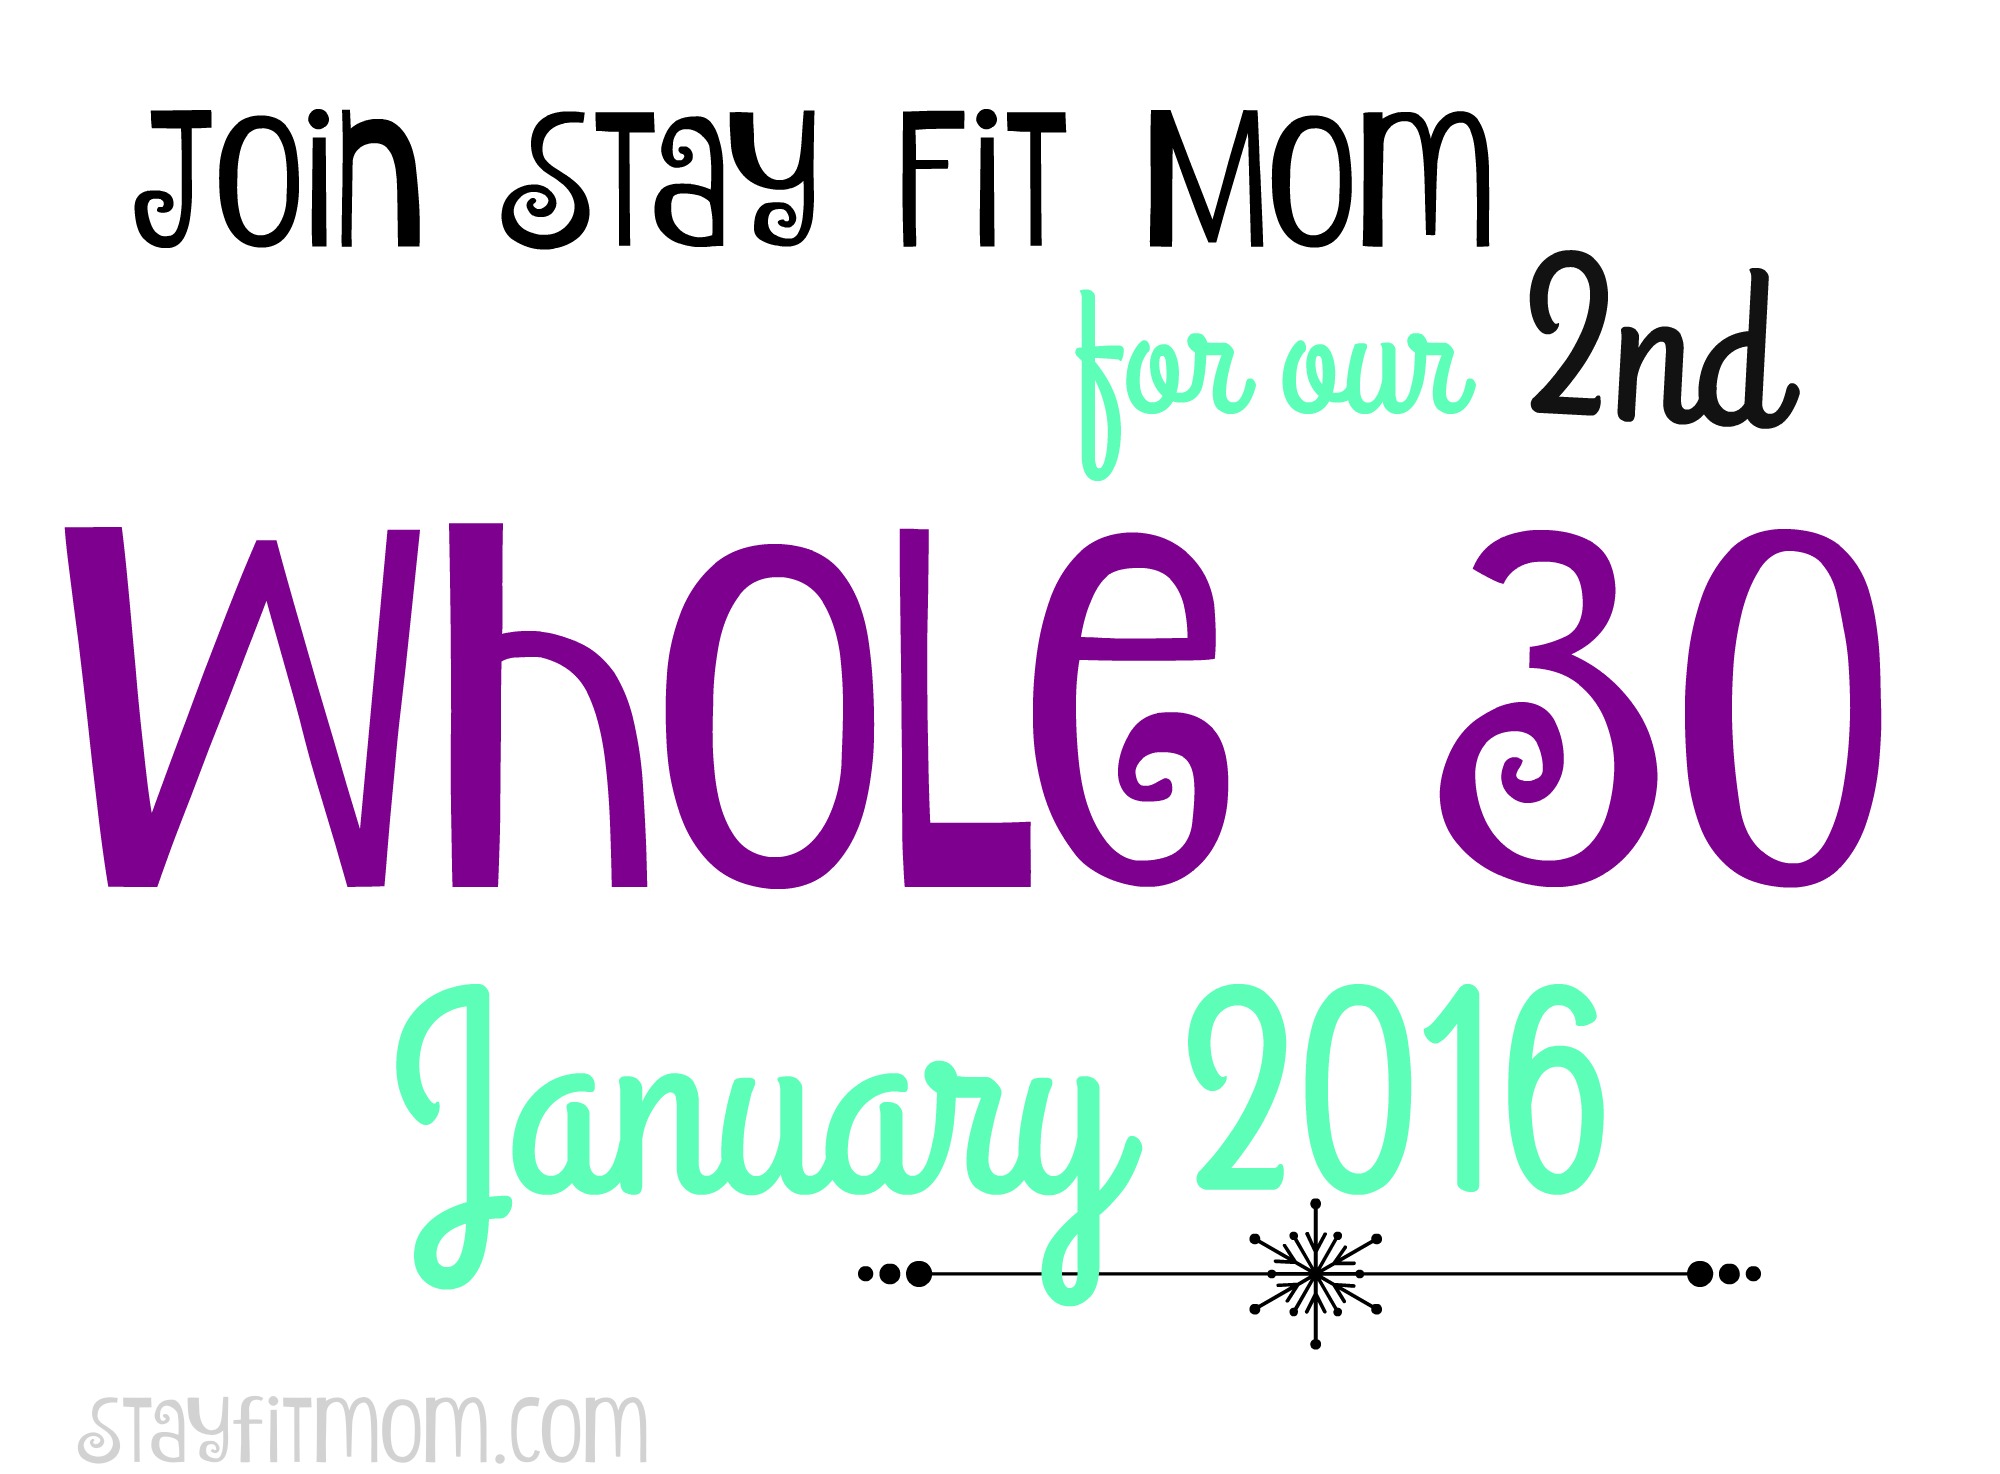 Recipes, meal plans, support, transformations, and more! Everything you need to take on your Whole 30!